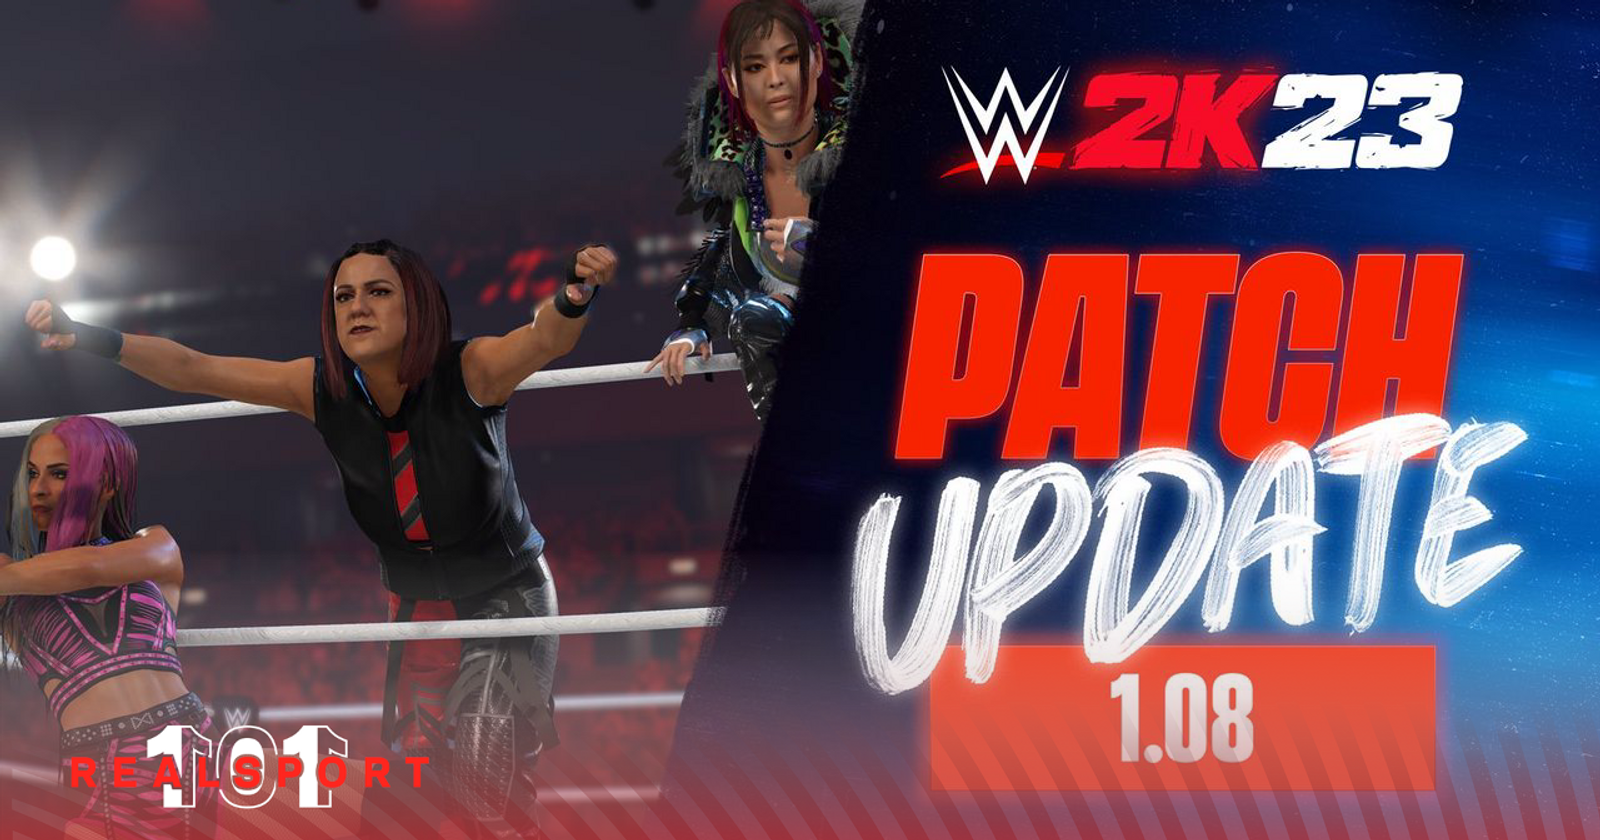 WWE 2K23 1.08 patch notes for PS5, Xbox, and PC